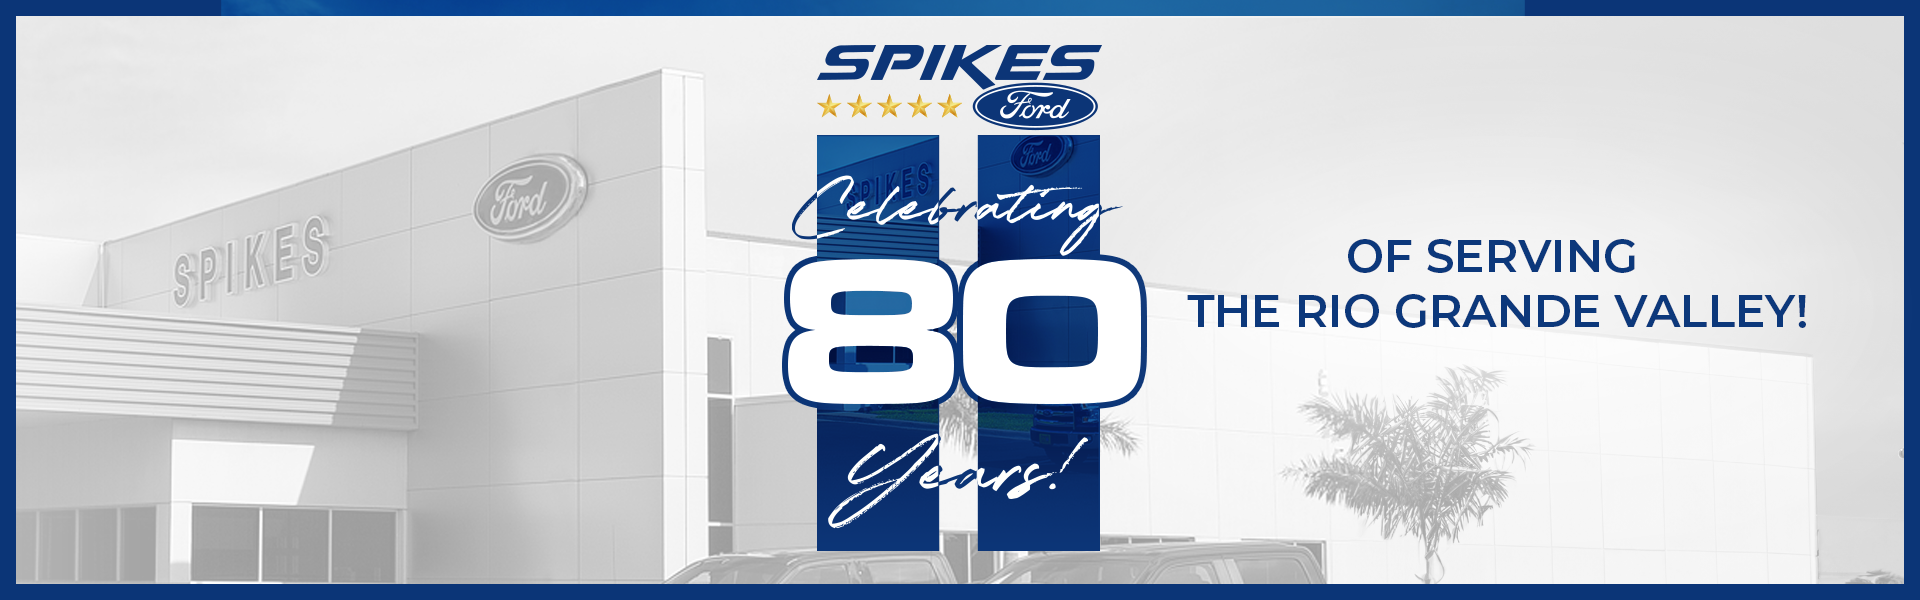 Spikes Ford | Celebrating 80 Years of Serving the Rio Grande Vall